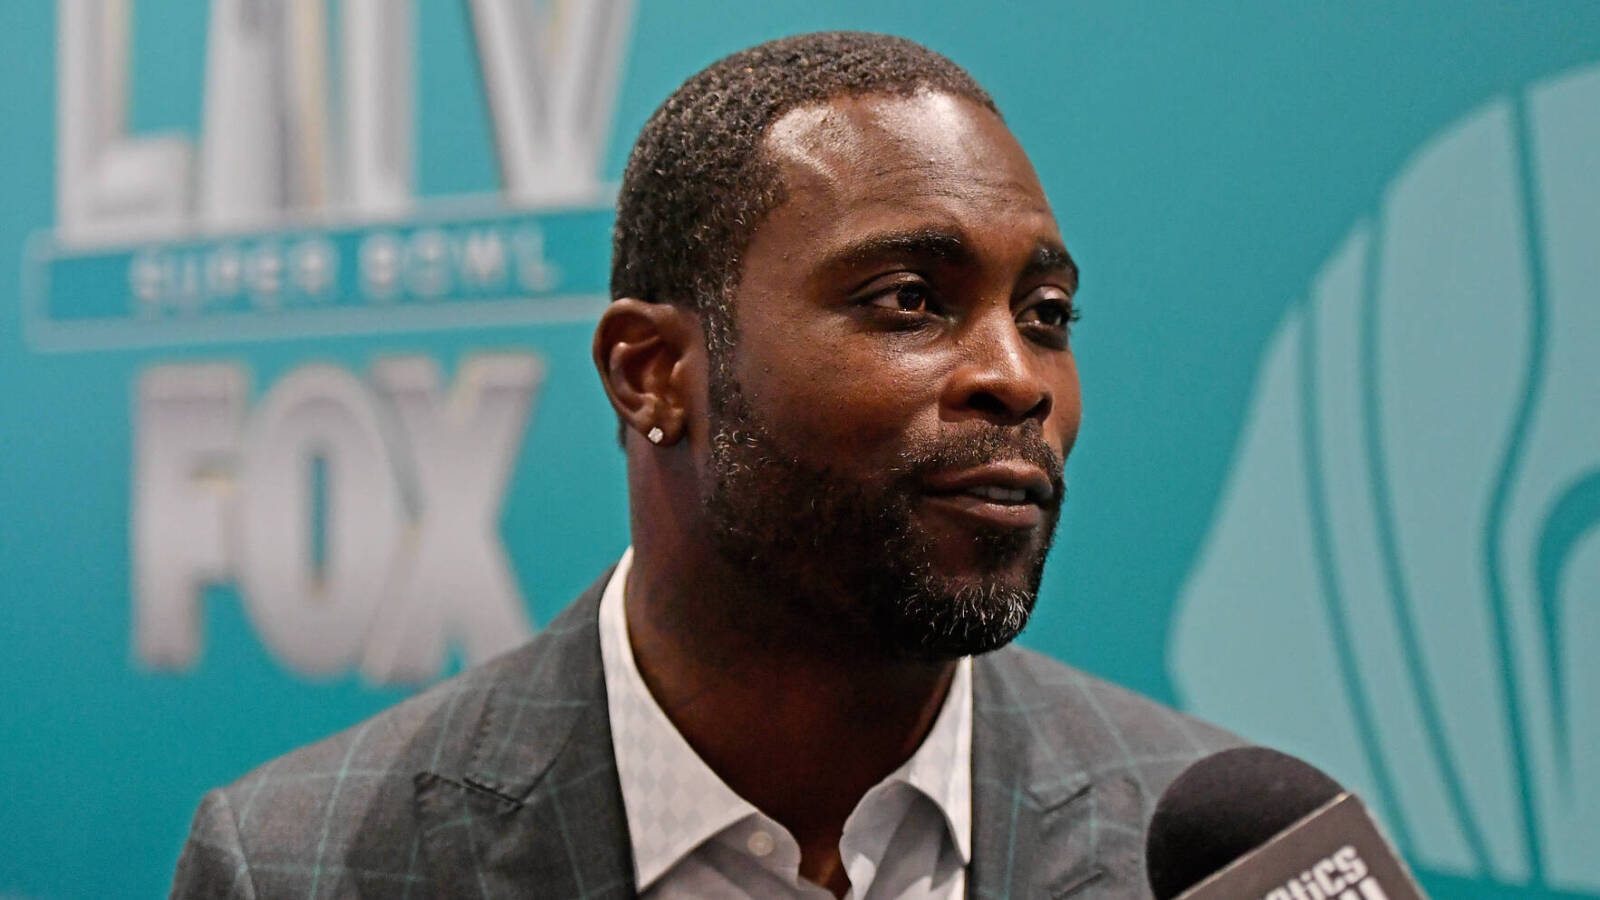 Michael Vick shares admission about dogfighting scandal